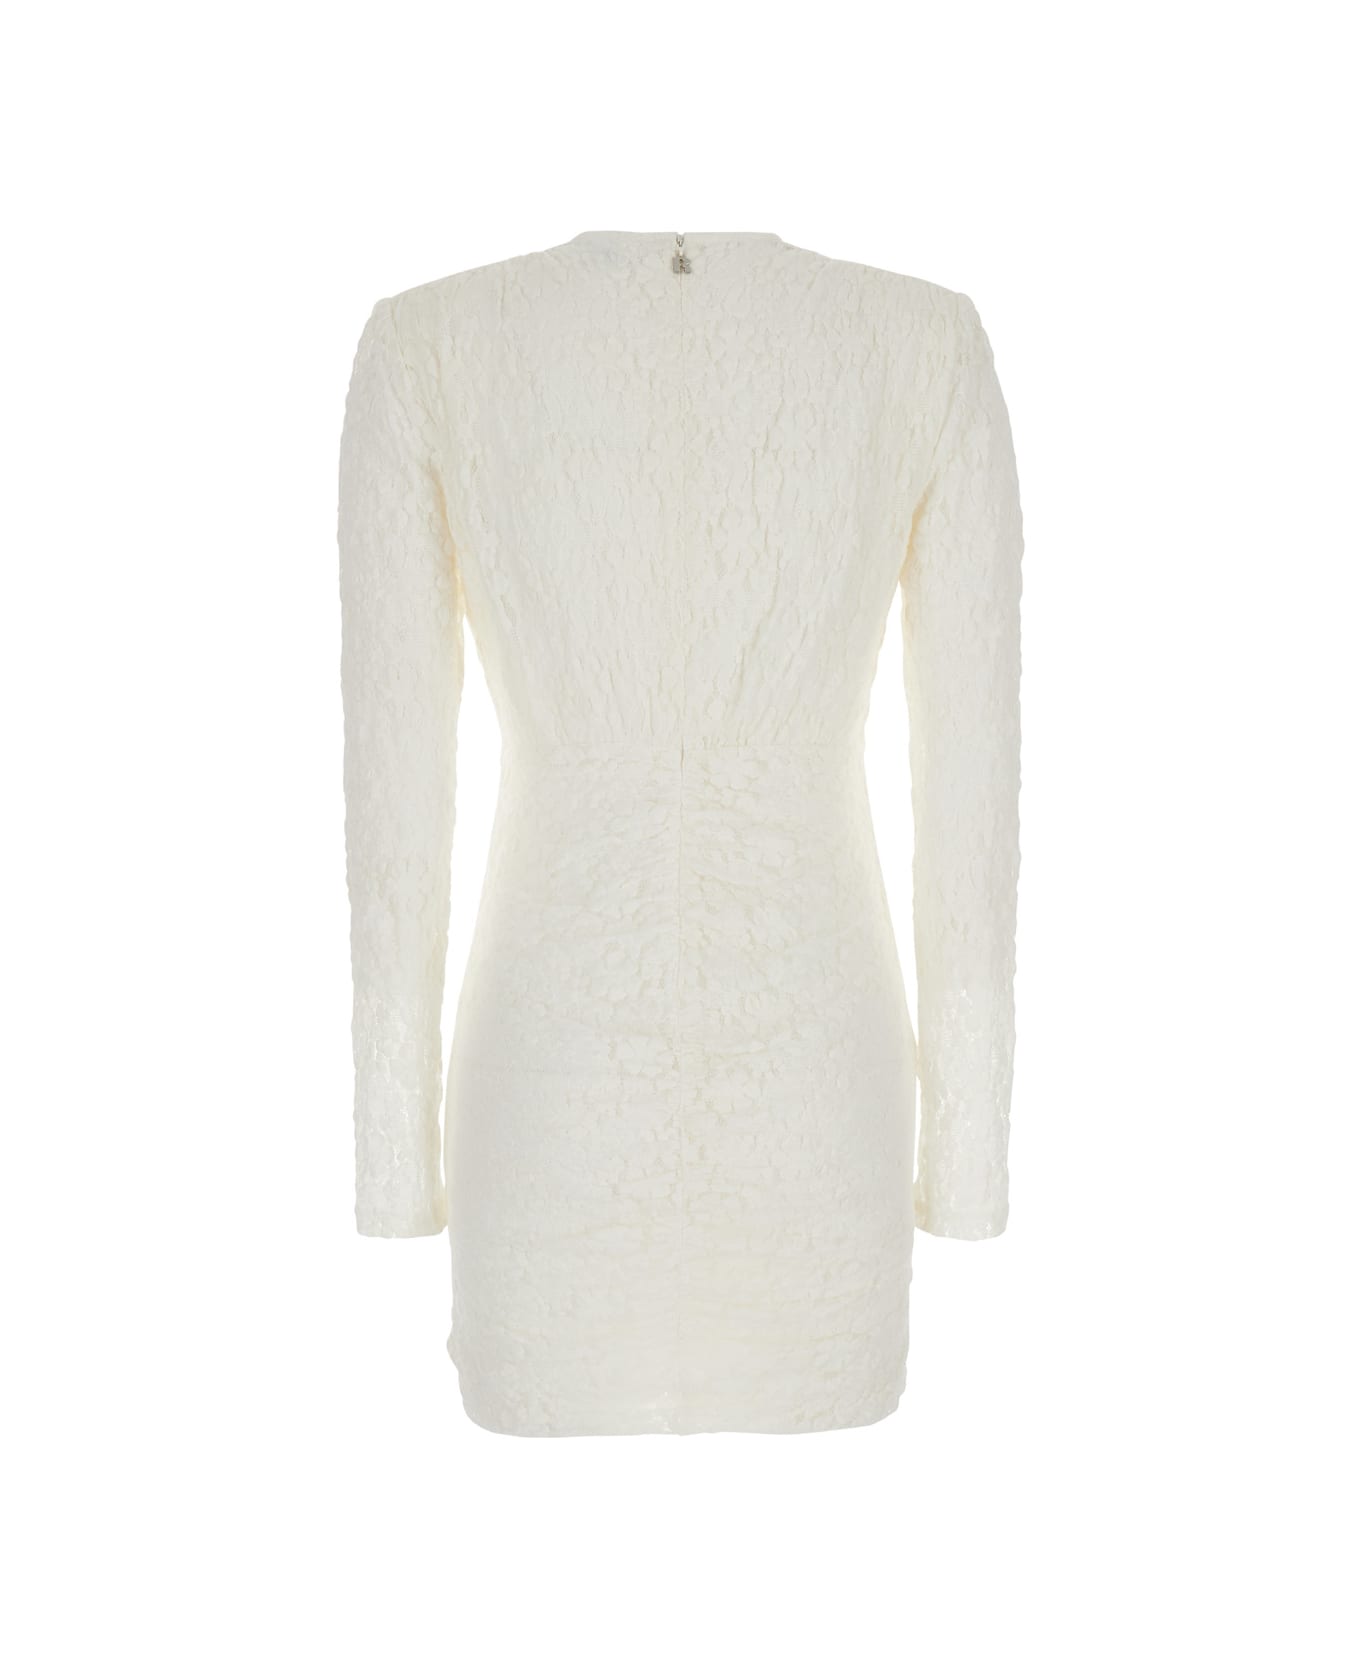 Rotate by Birger Christensen Mini White Dress With Rose Patch In Lace Woman - White